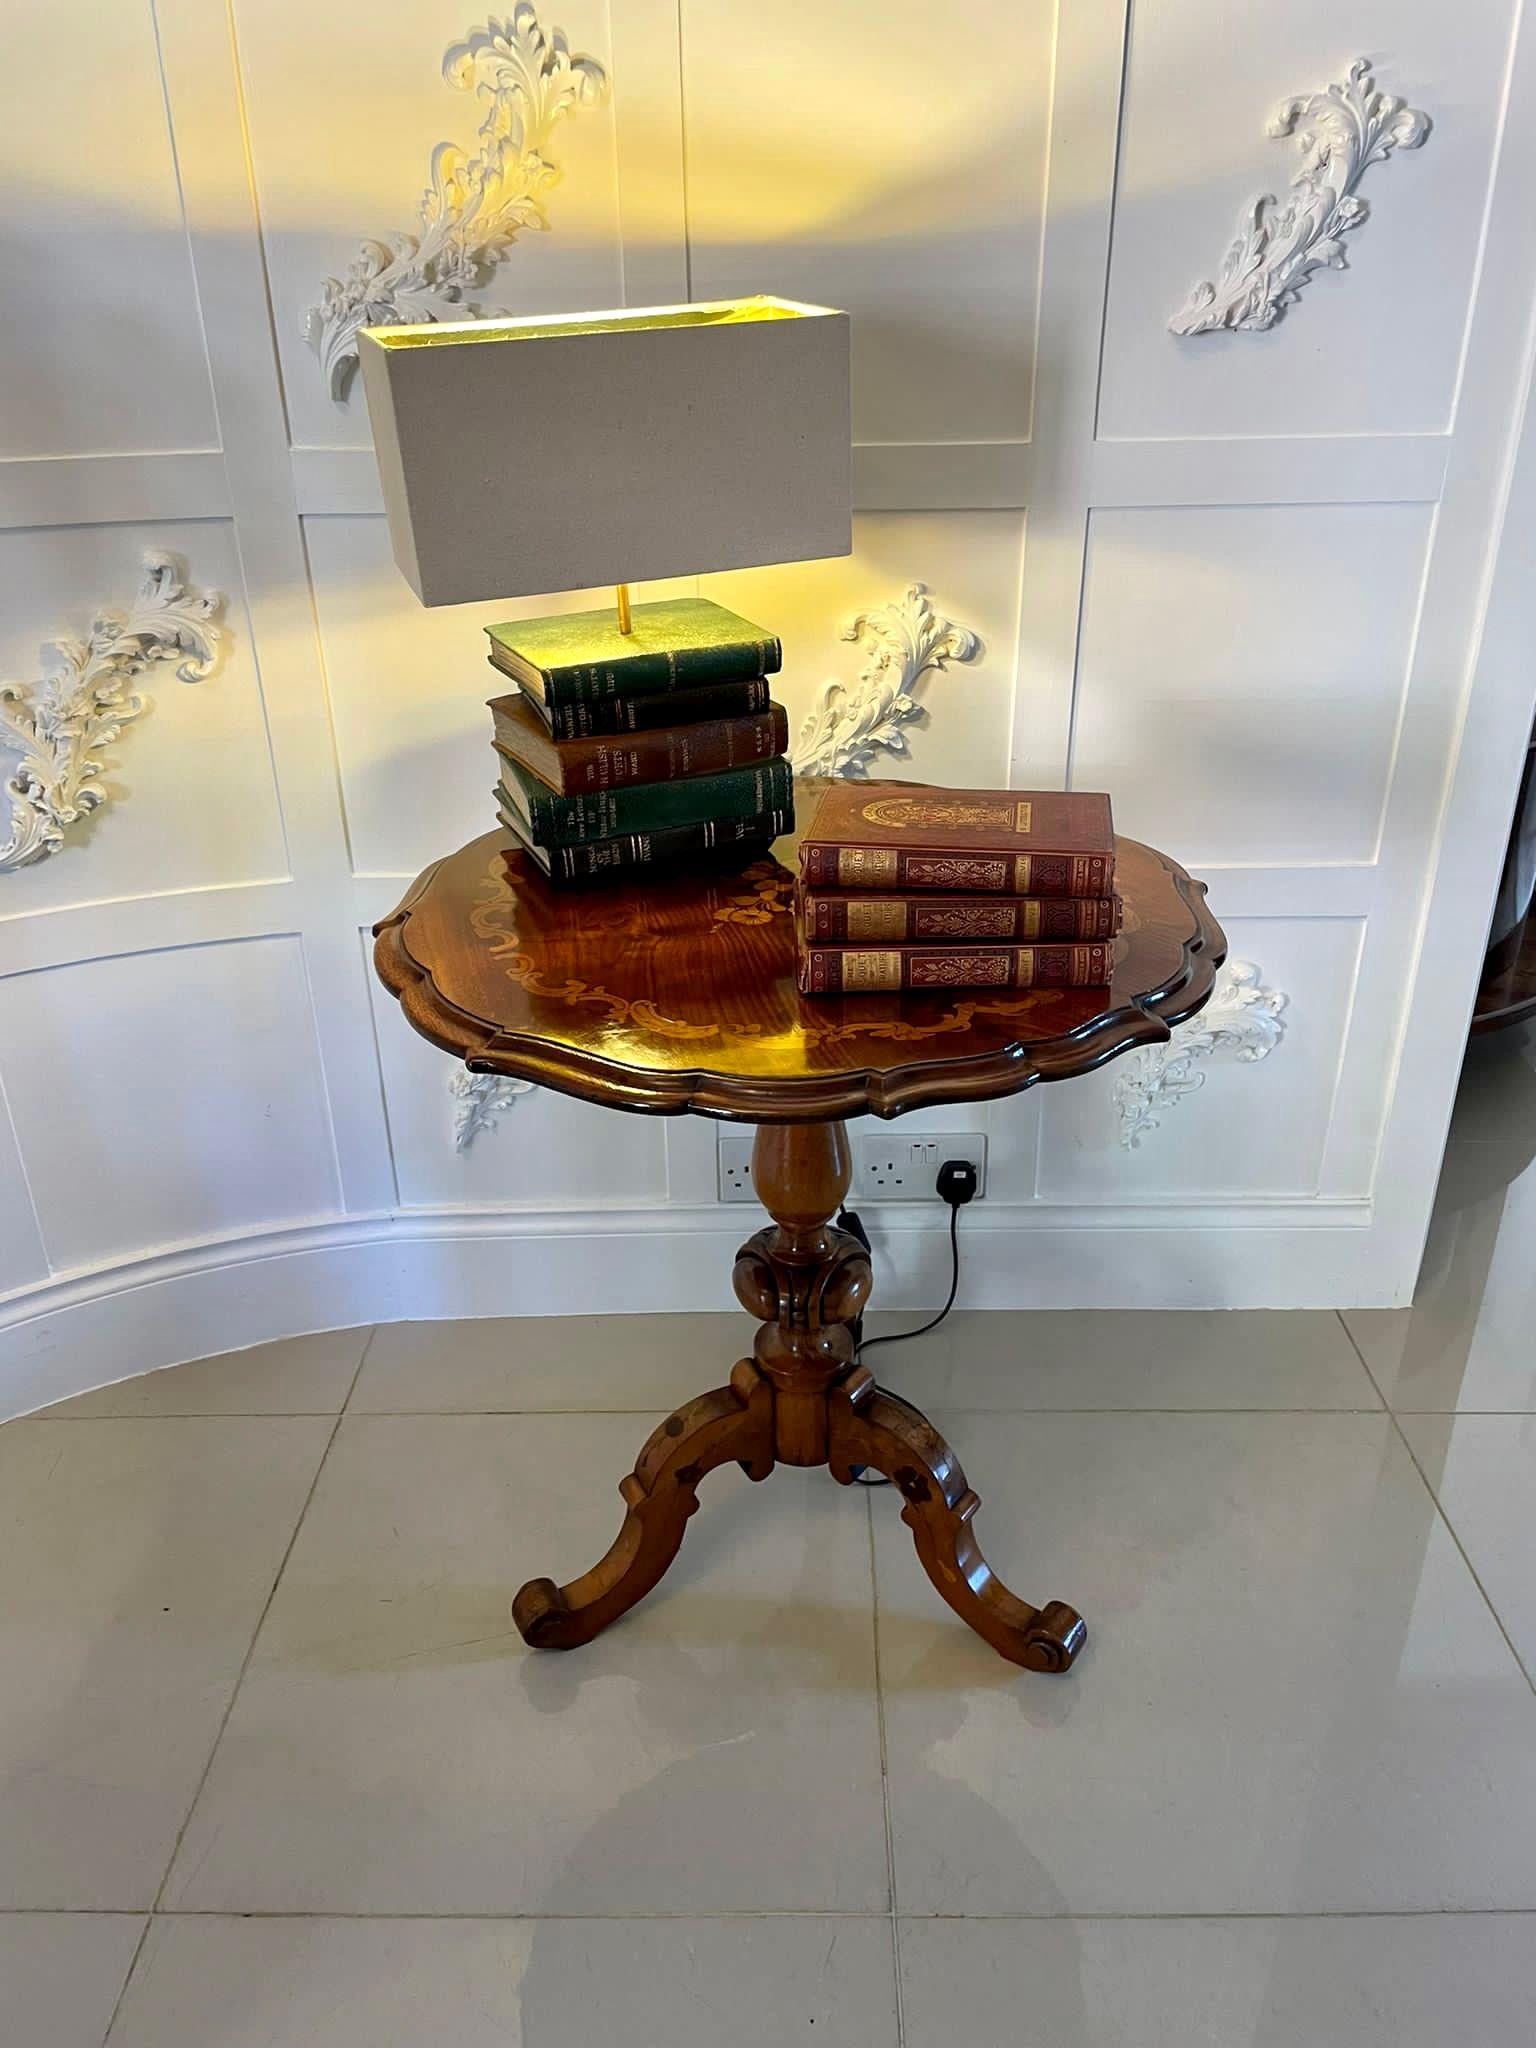 Outstanding quality large antique Victorian walnut marquetry inlaid lamp table having an outstanding quality burr walnut marquetry inlaid shaped top with a moulded edge supported by a shaped turned carved solid walnut column standing on three walnut